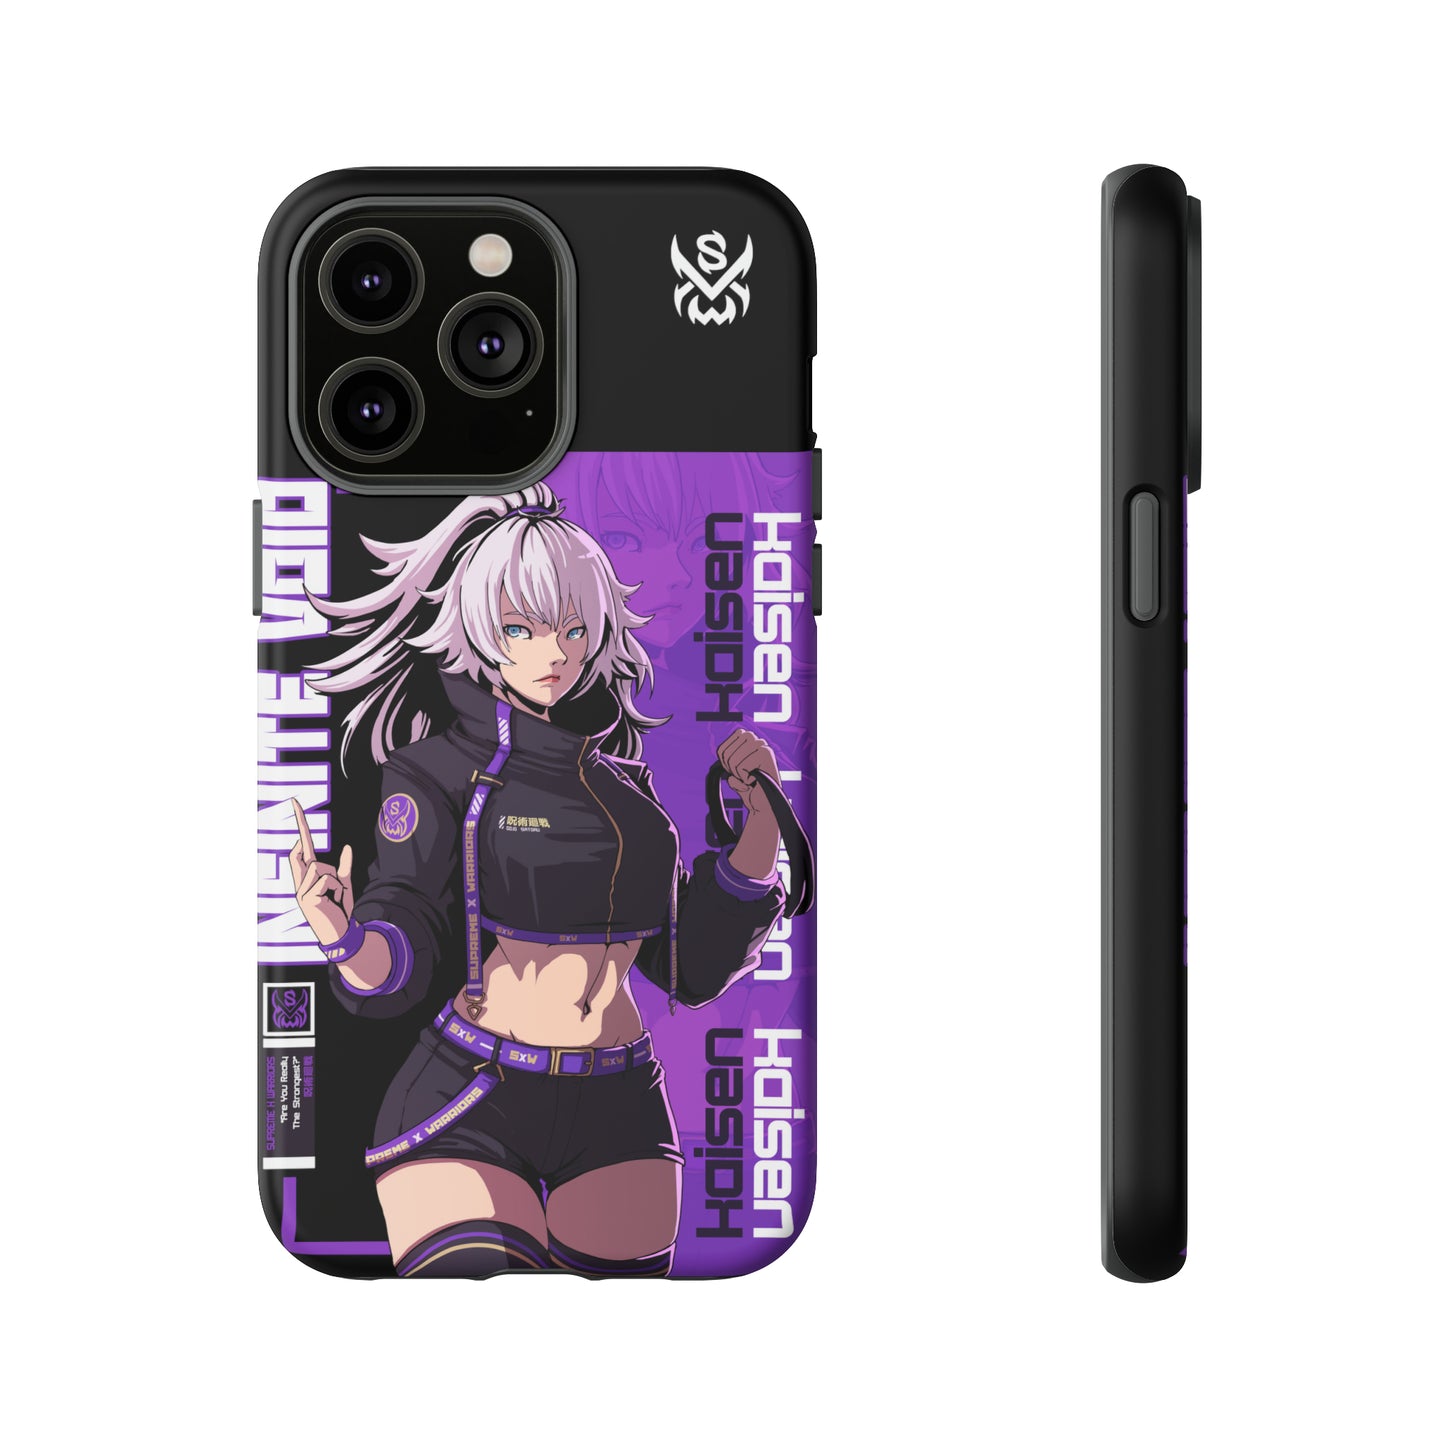 Infinite Void / iPhone Case - LIMITED